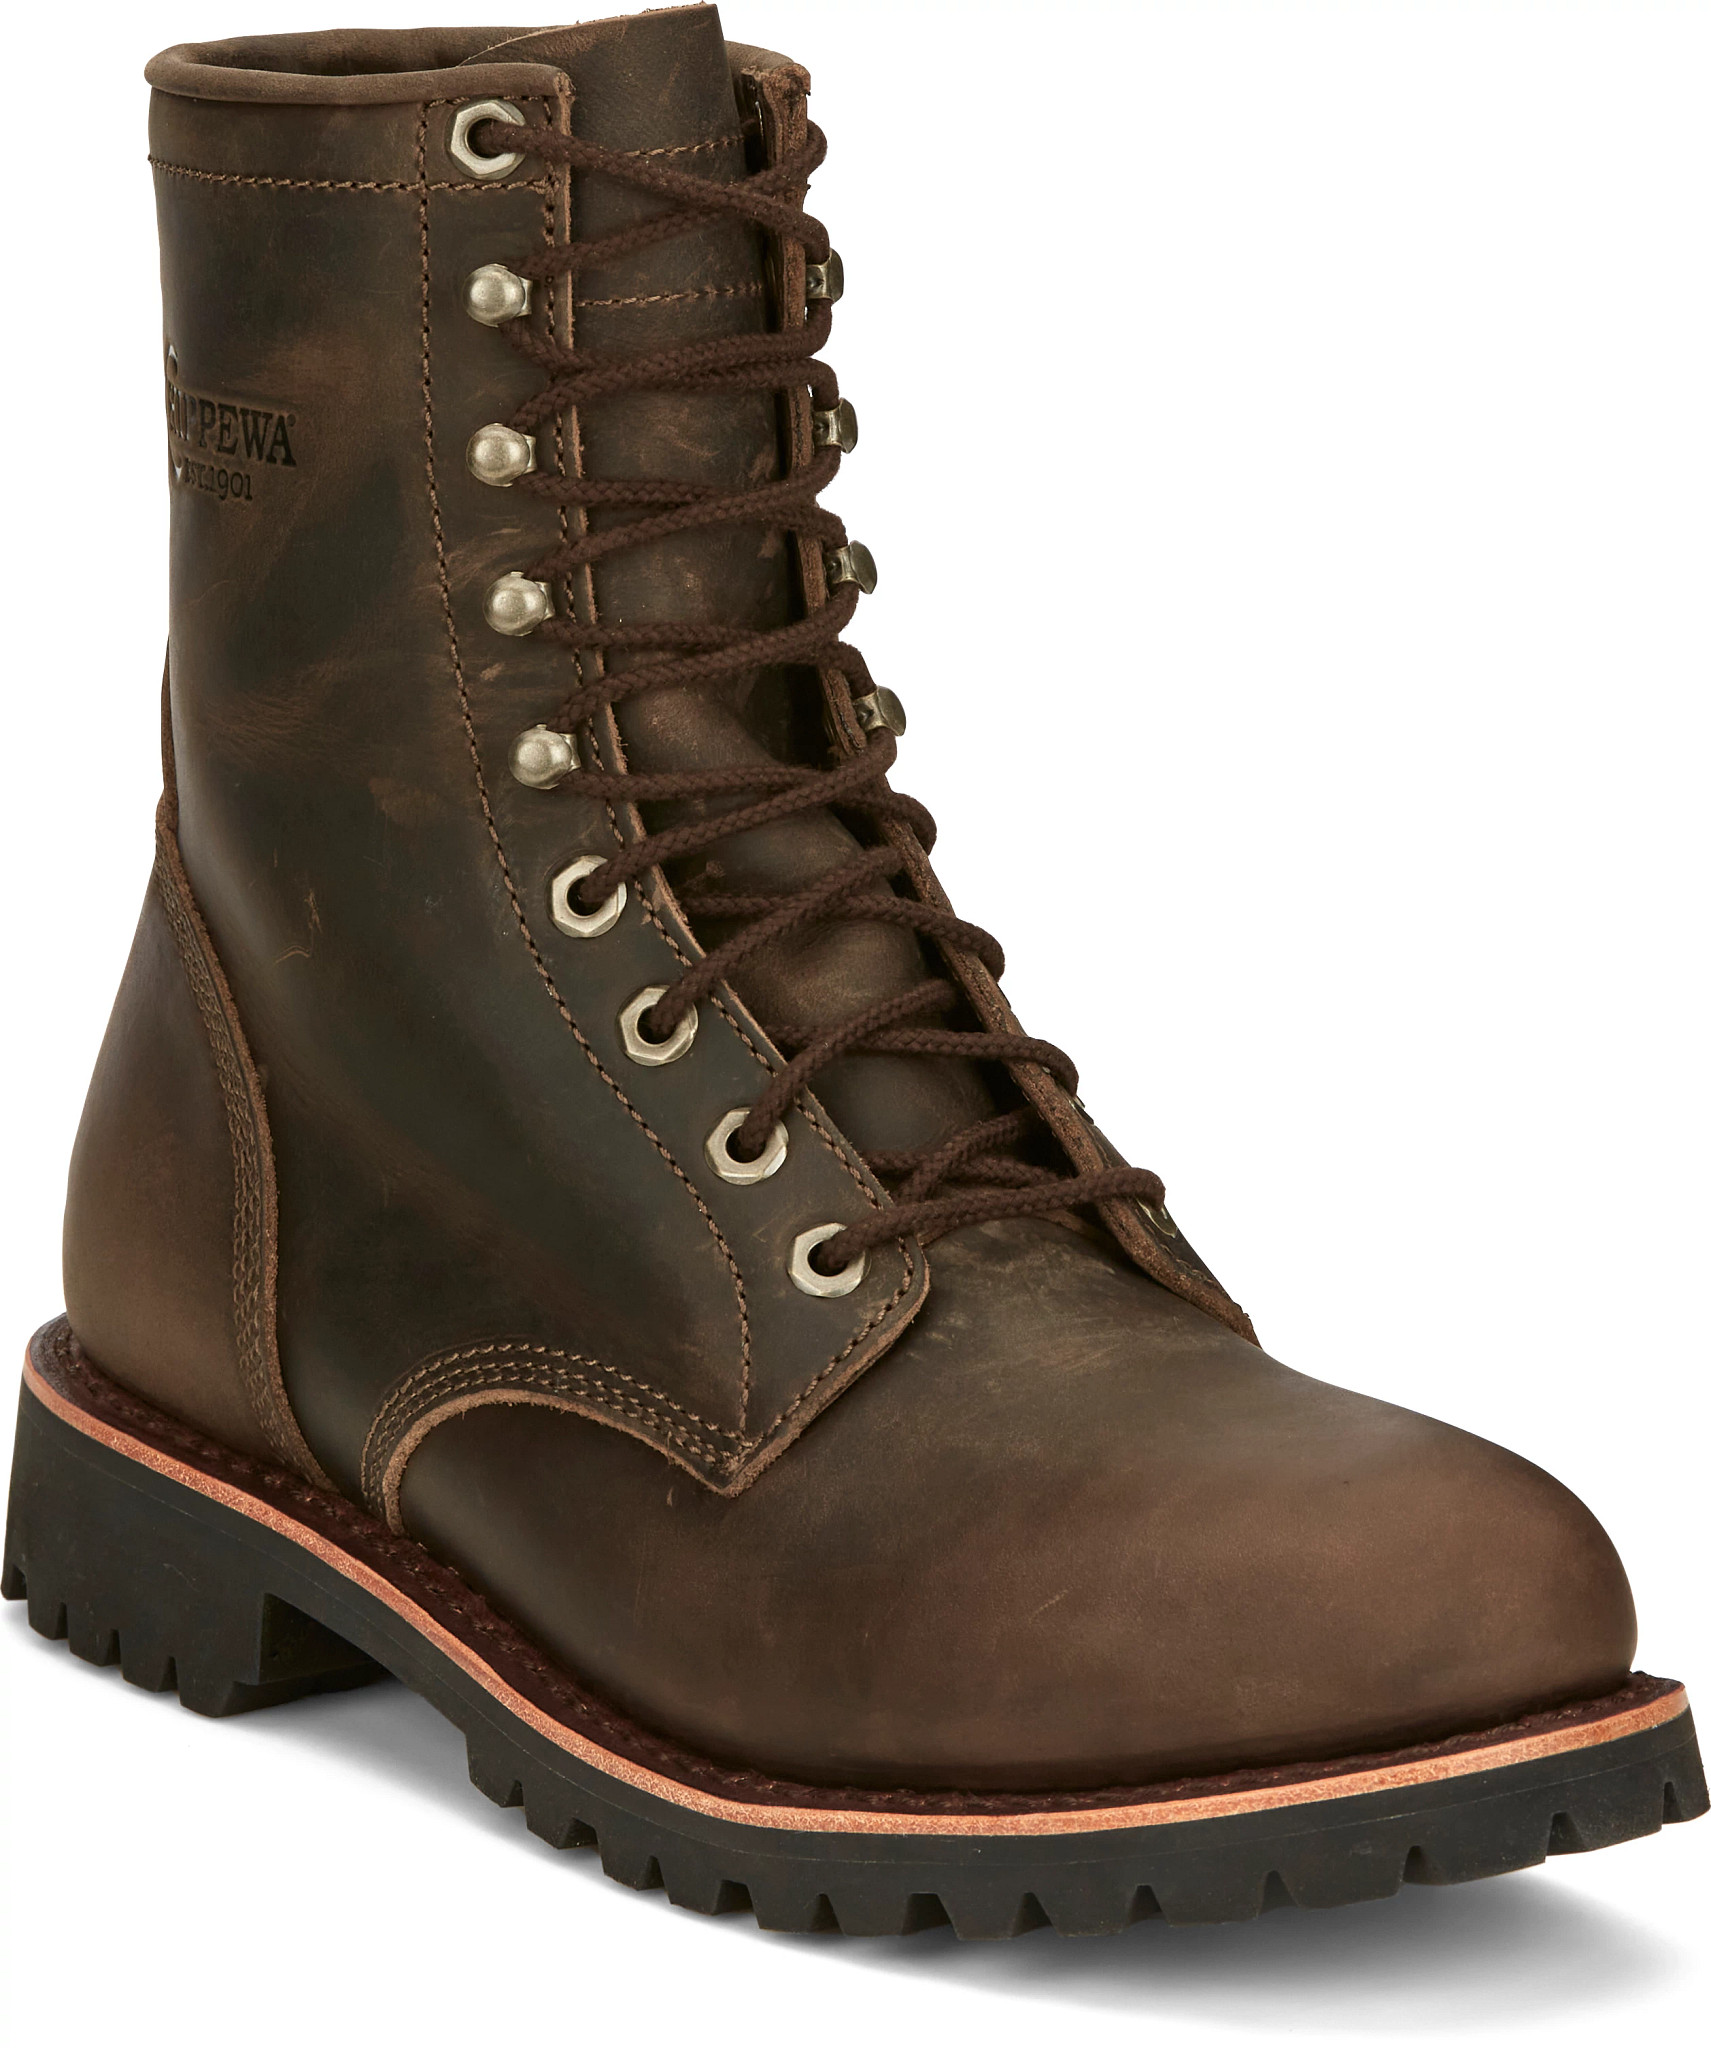 Classic 2.0 Boots Collection | Chippewa Boots